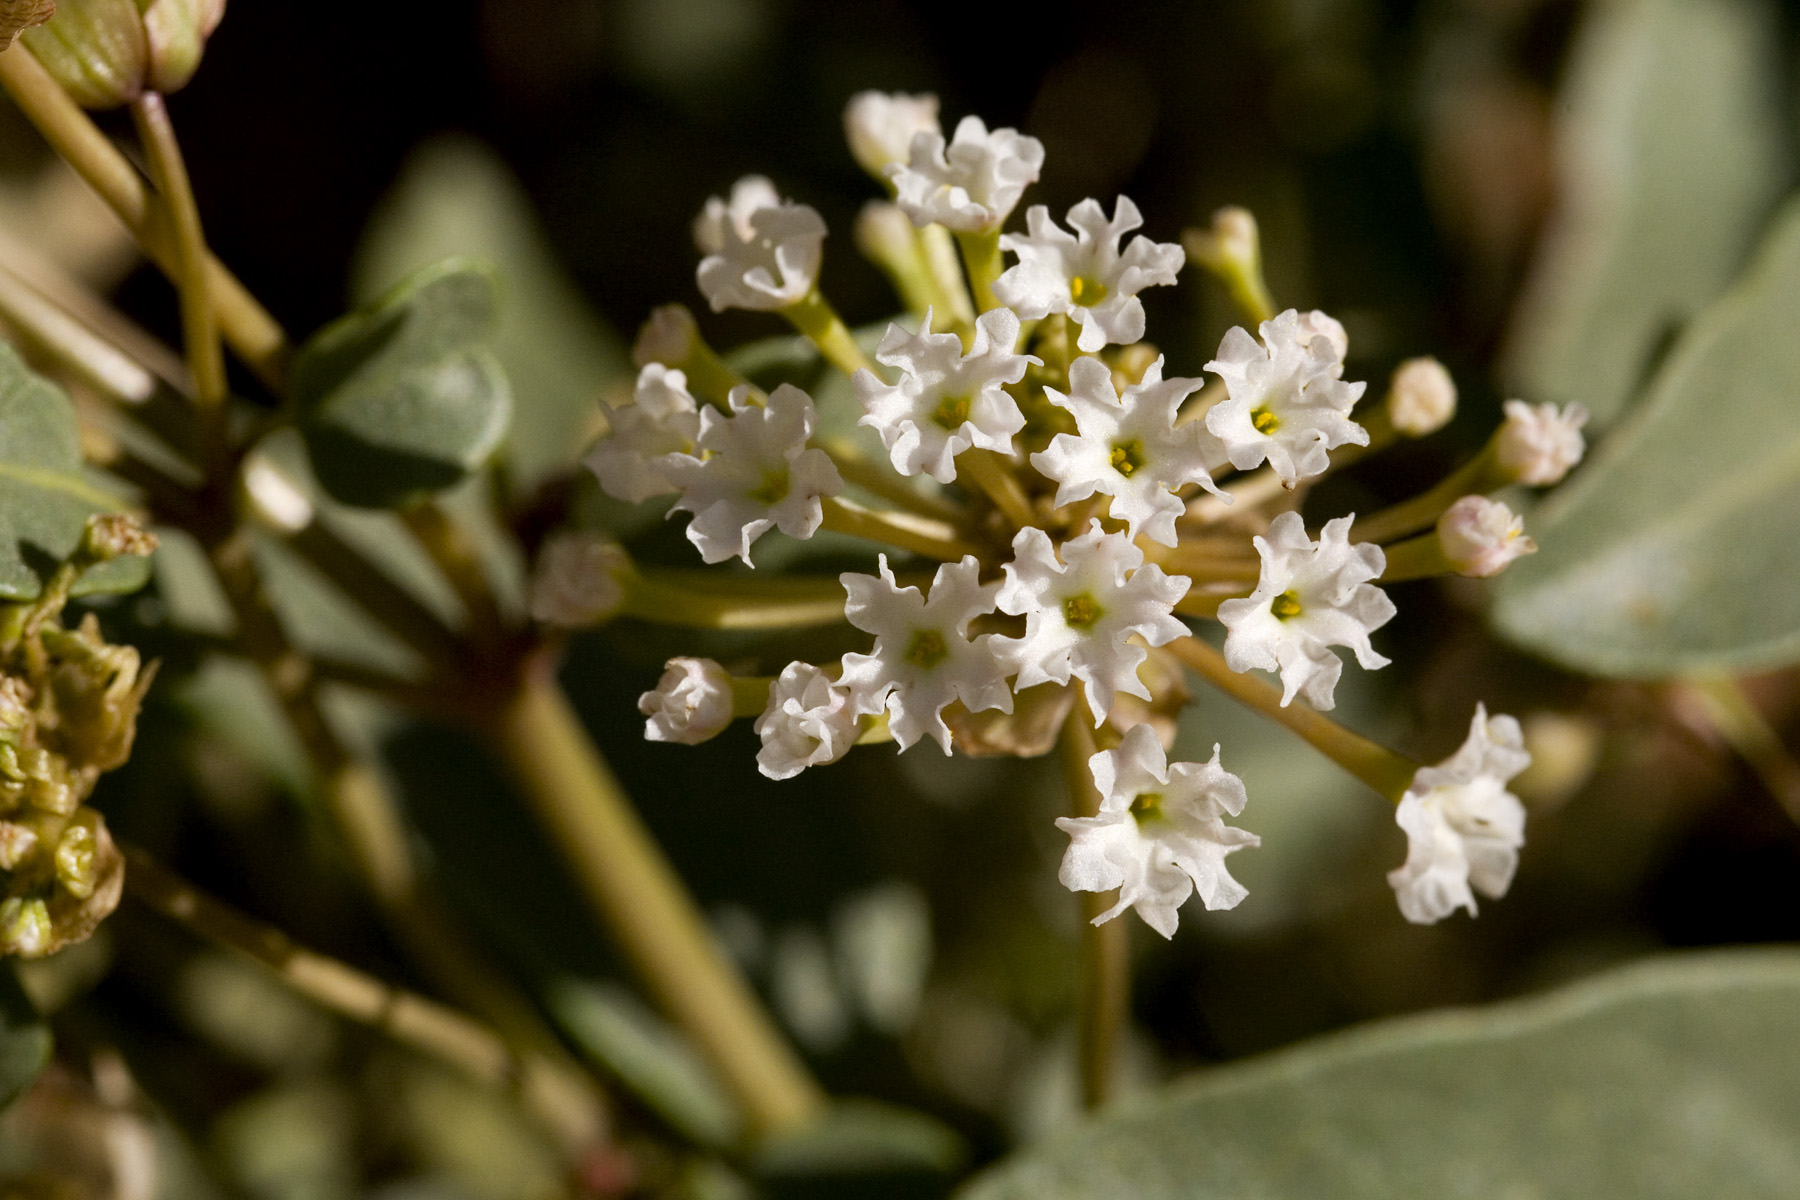 Small white flowers in a cluster